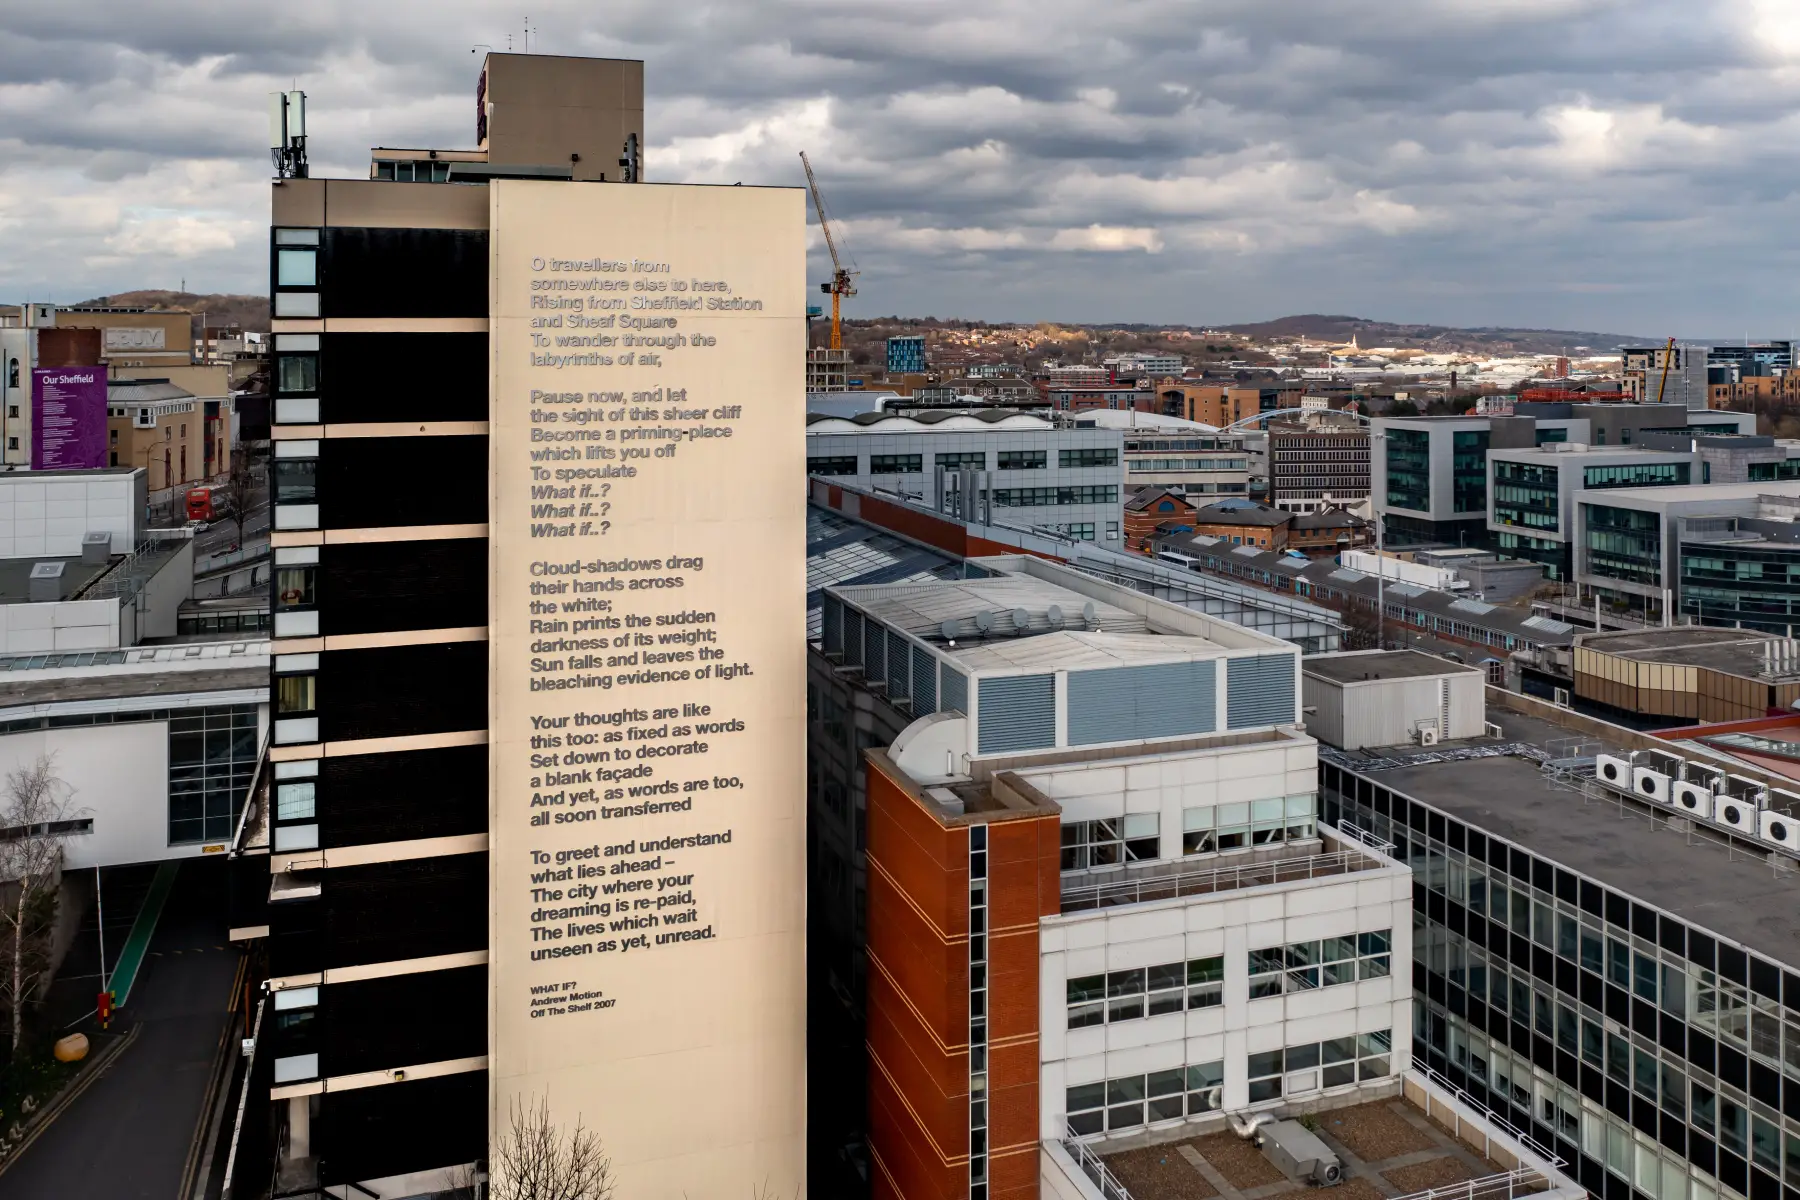 A modern university building at Sheffield Hallam university, with Sheffield skyline as background. There is a poem on the side of the building: What If? by Andrew Motion.